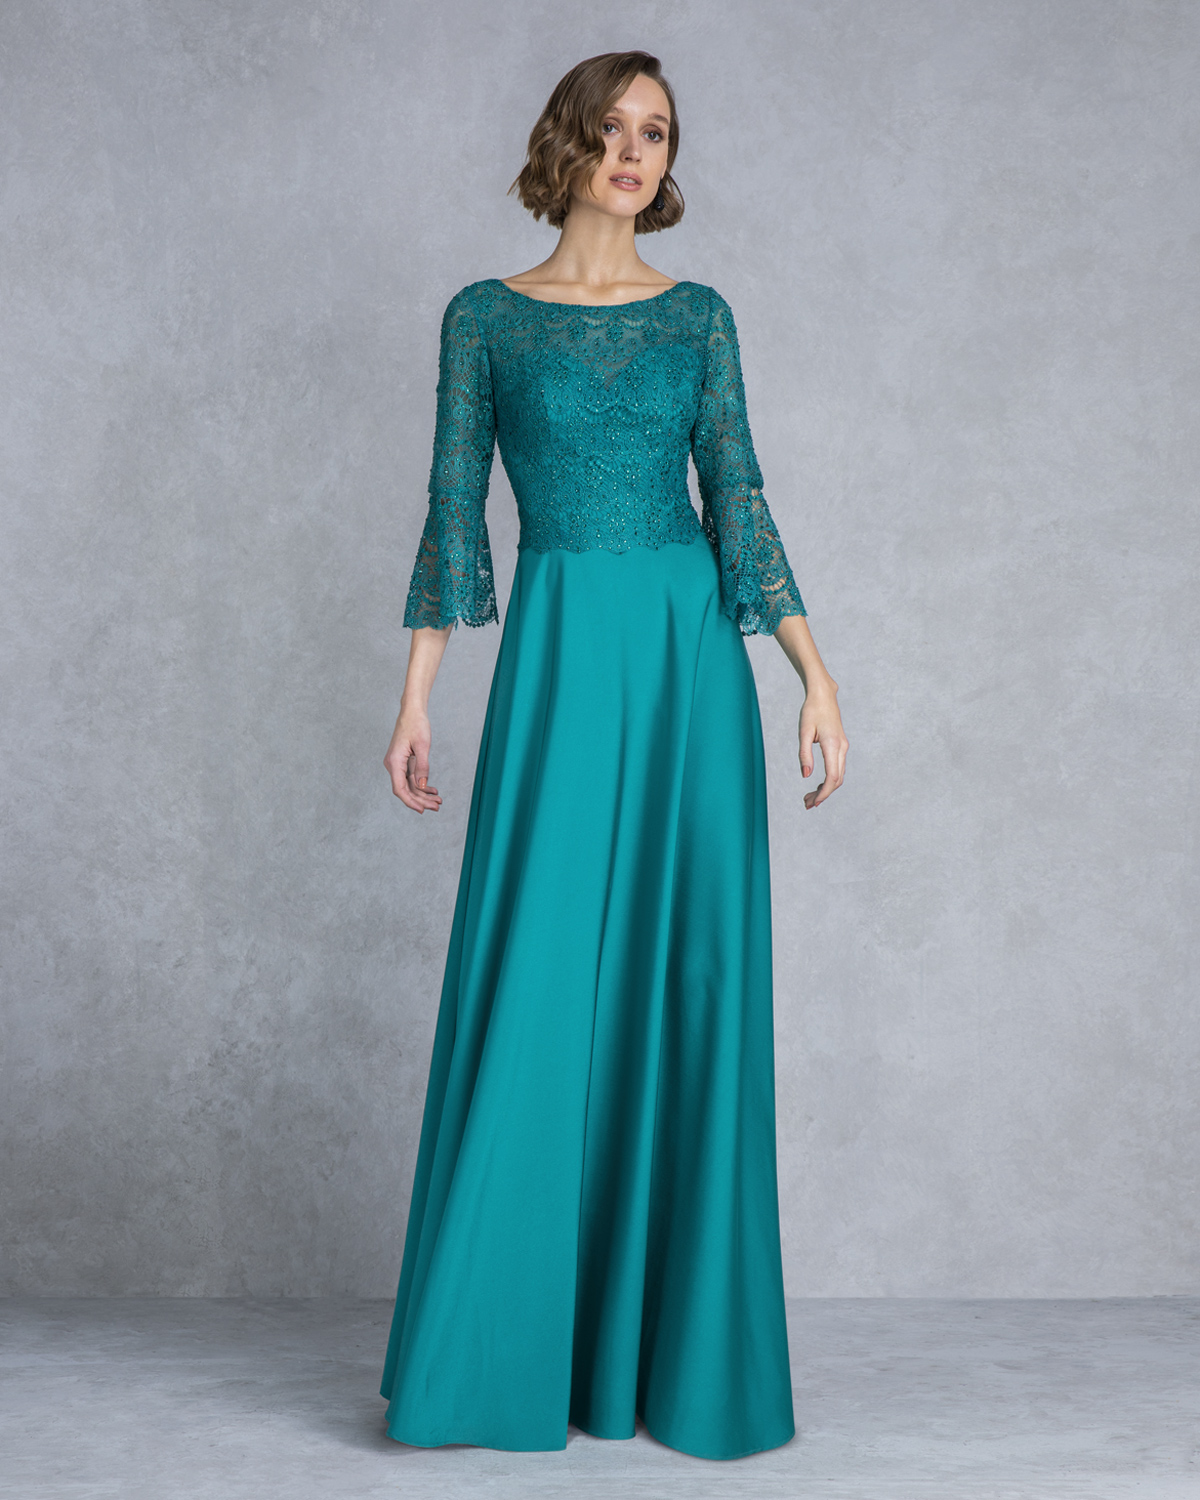 Классические платья / Long evening dress with lace top and sleeves